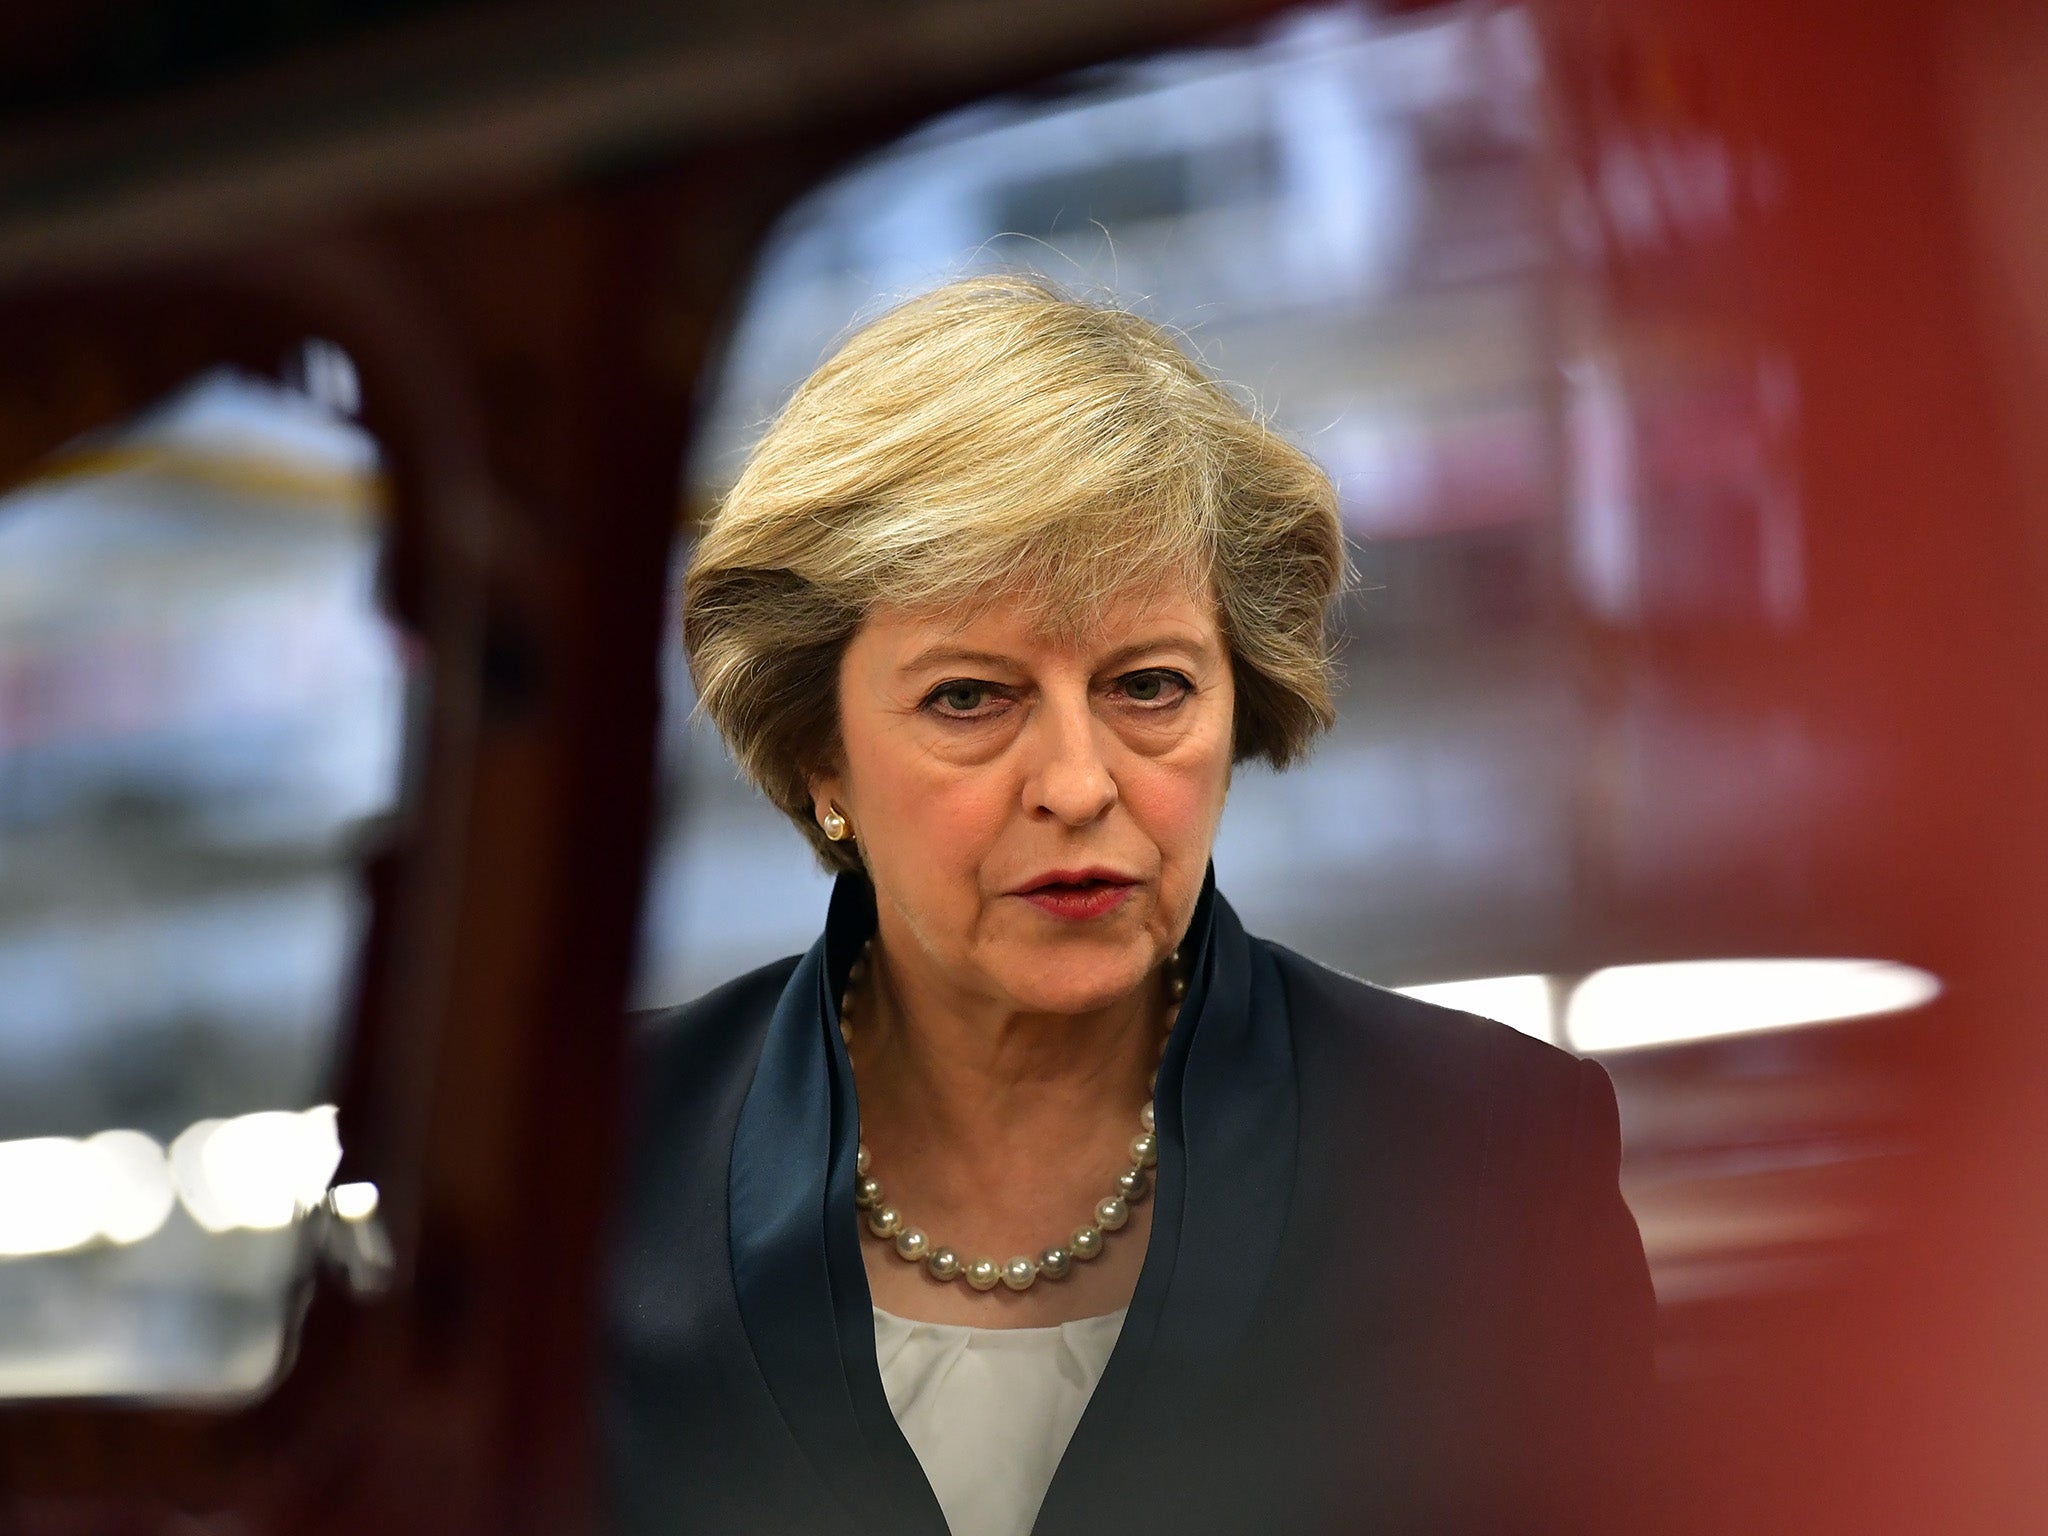 Brexit: Leaked recordings reveal Theresa May's pro-EU stance ahead of EU referendum